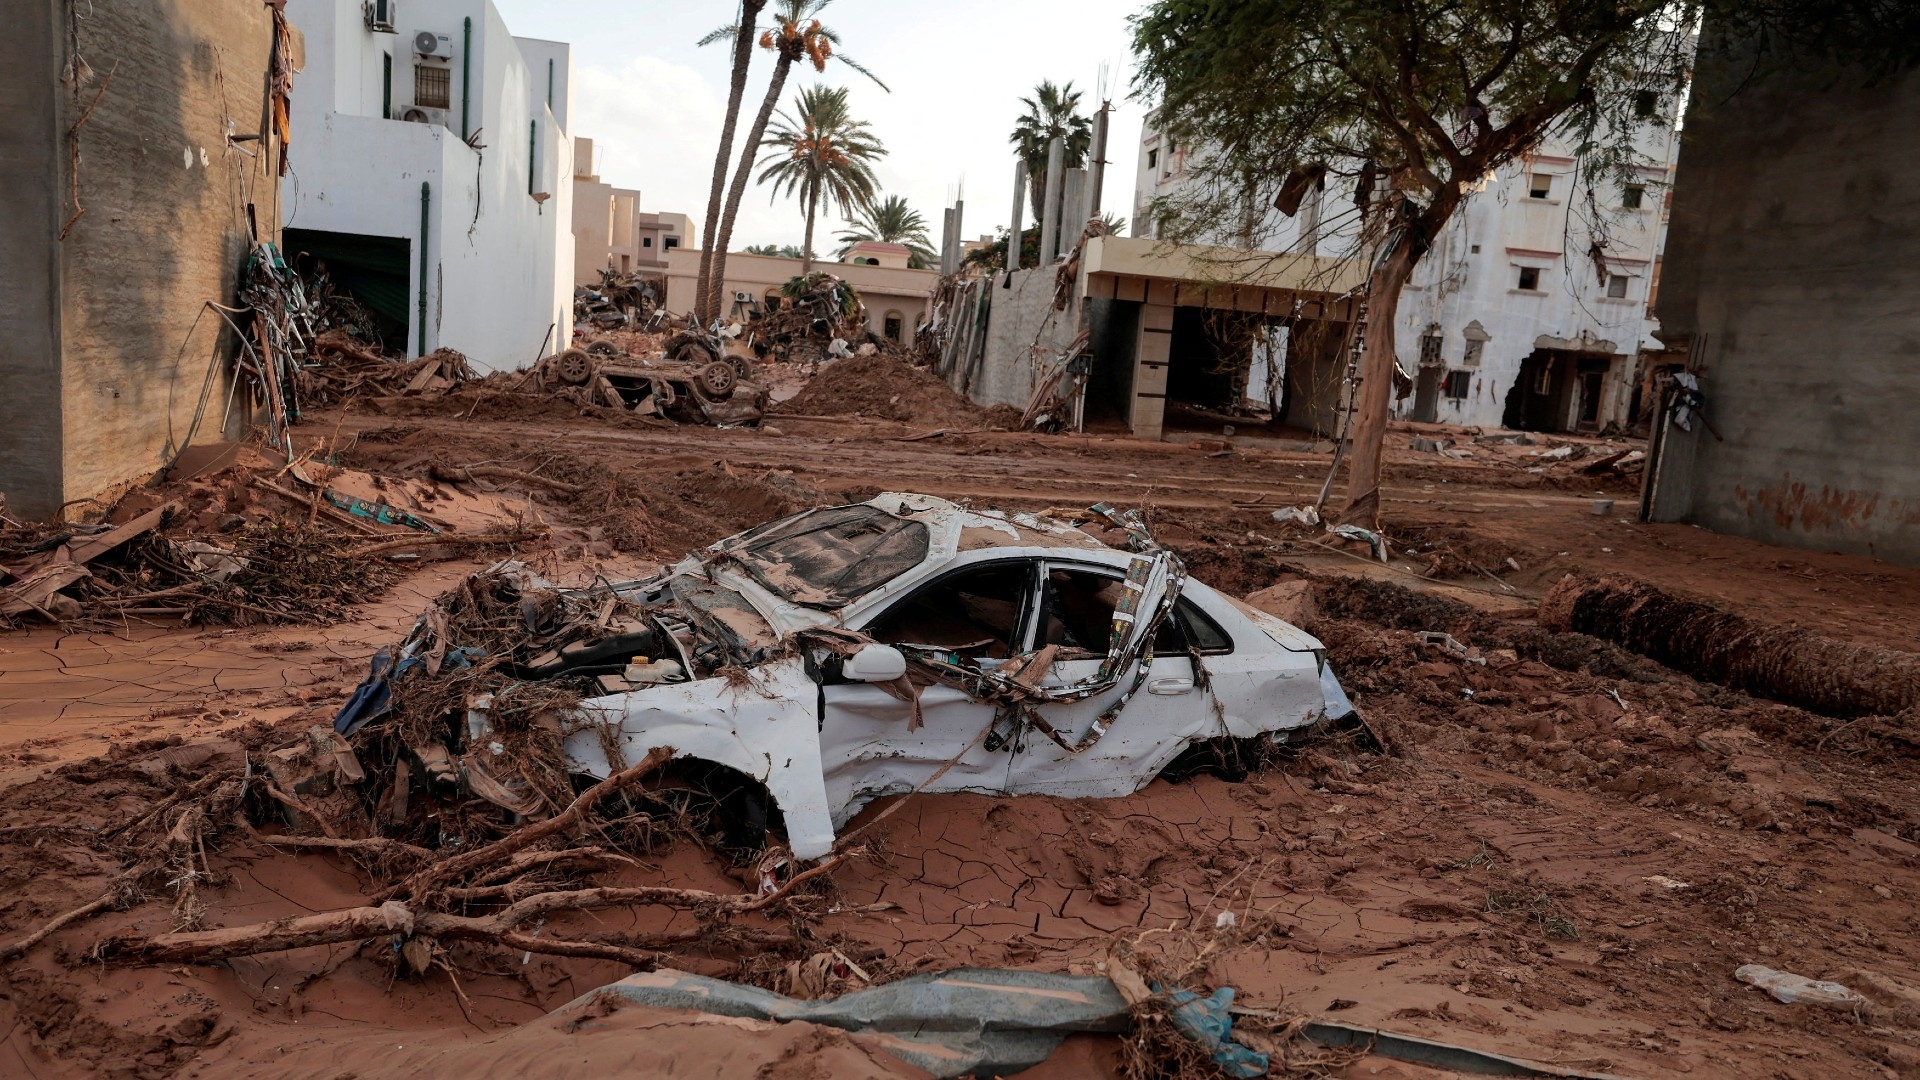 A car is submerged in mud after a powerful storm and heavy rainfall hit Libya, in Derna, 16 September